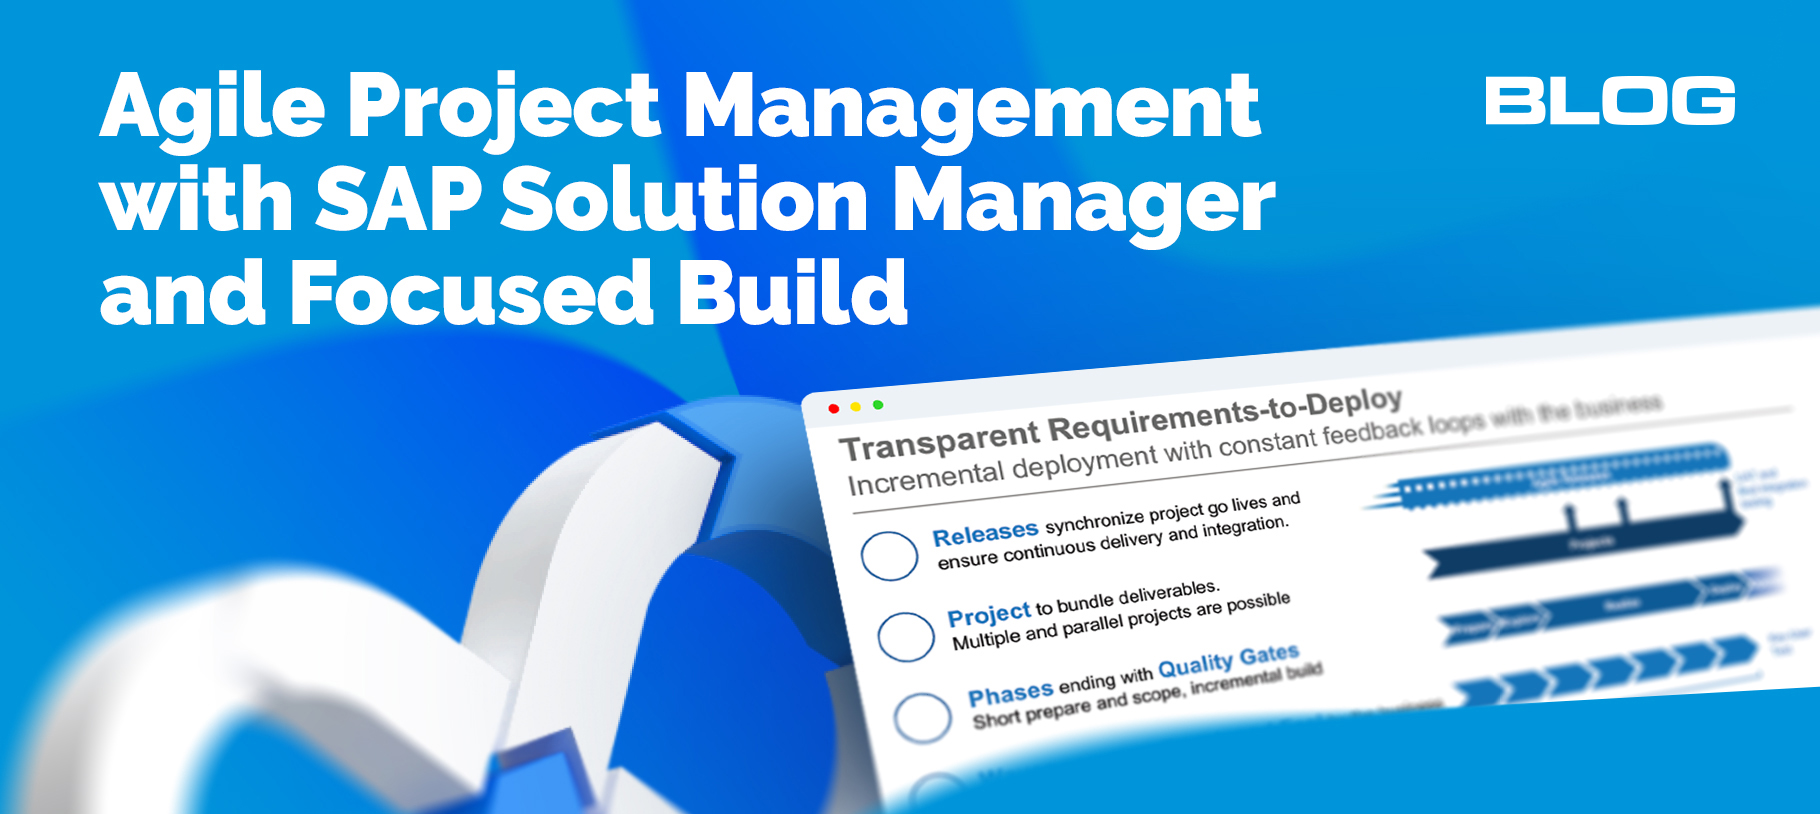 Agile Project Management With SAP Solution Manager And Focused Build